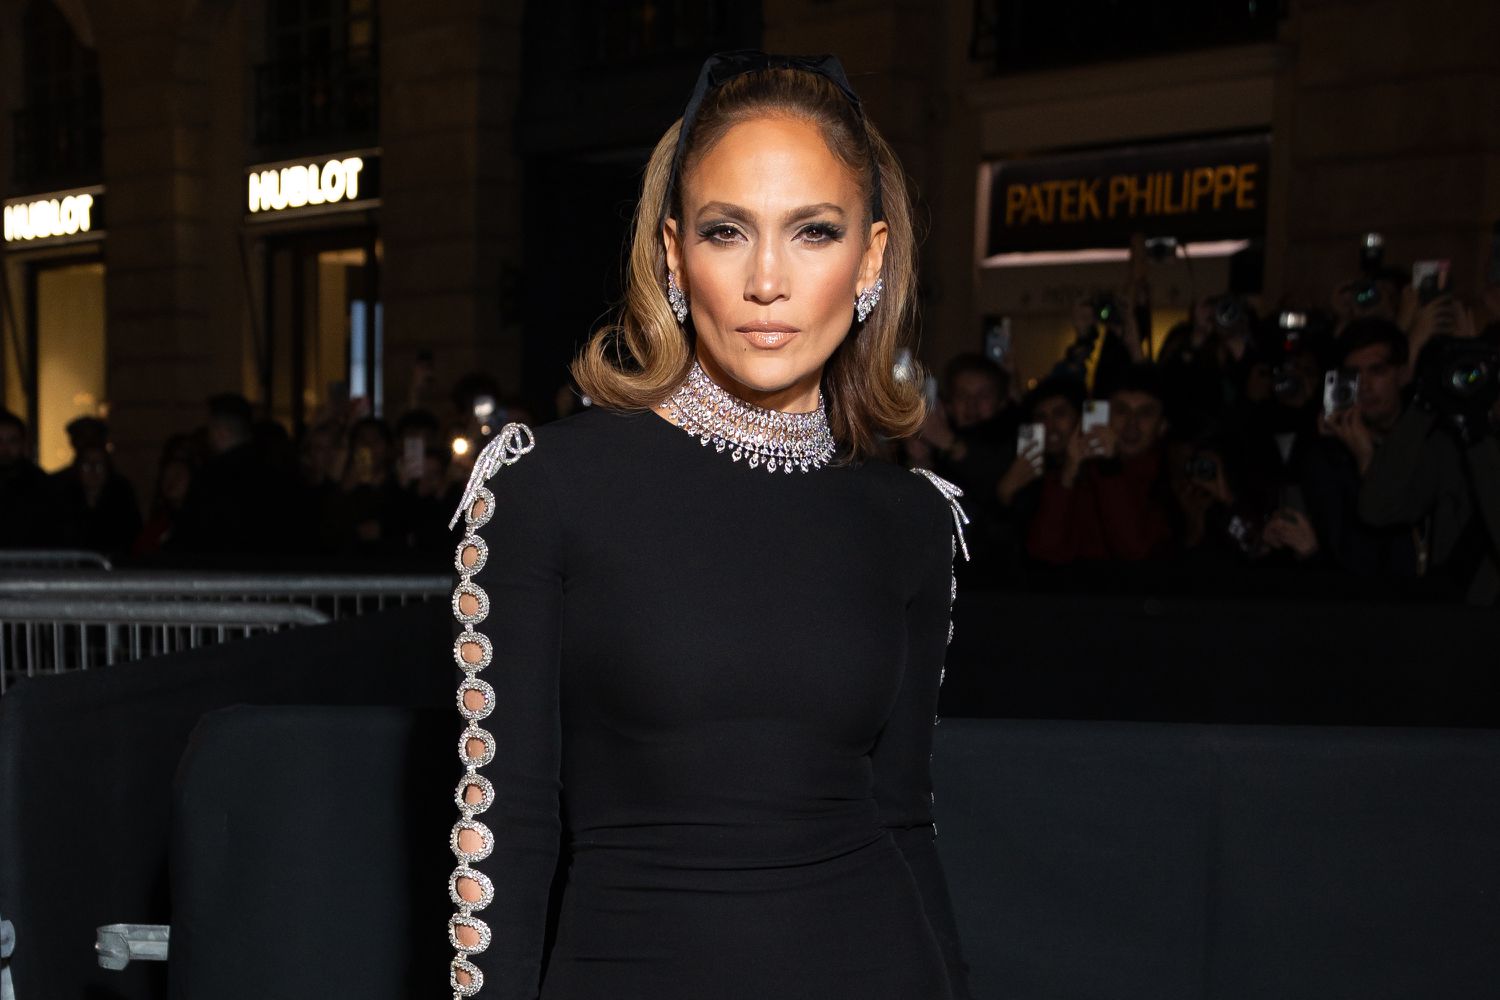 ‘Queen of the Chick Flicks’ JLo Can Earn Over £428K for a Single Social Media Post